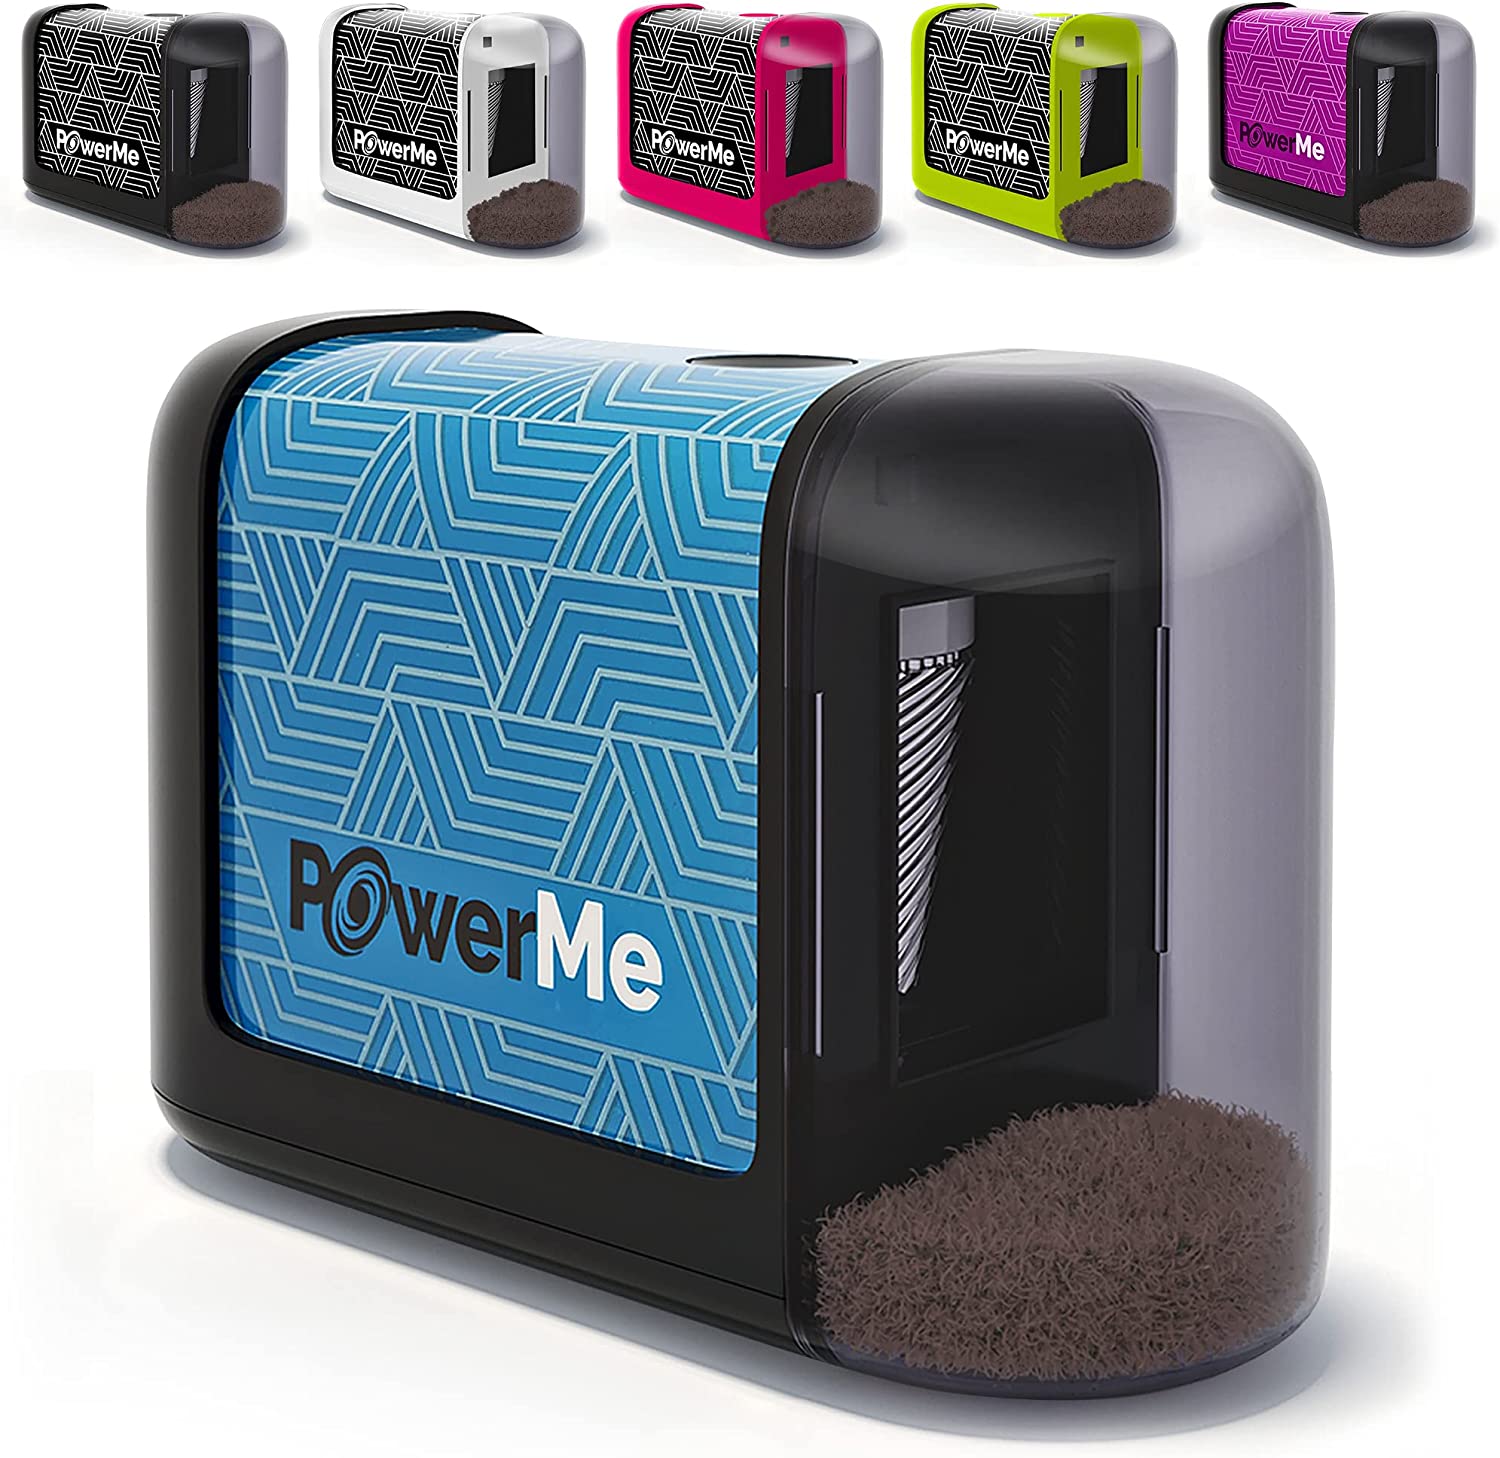 PowerMe Battery Operated Ultra Portable Automatic Electric Pencil Sharpener